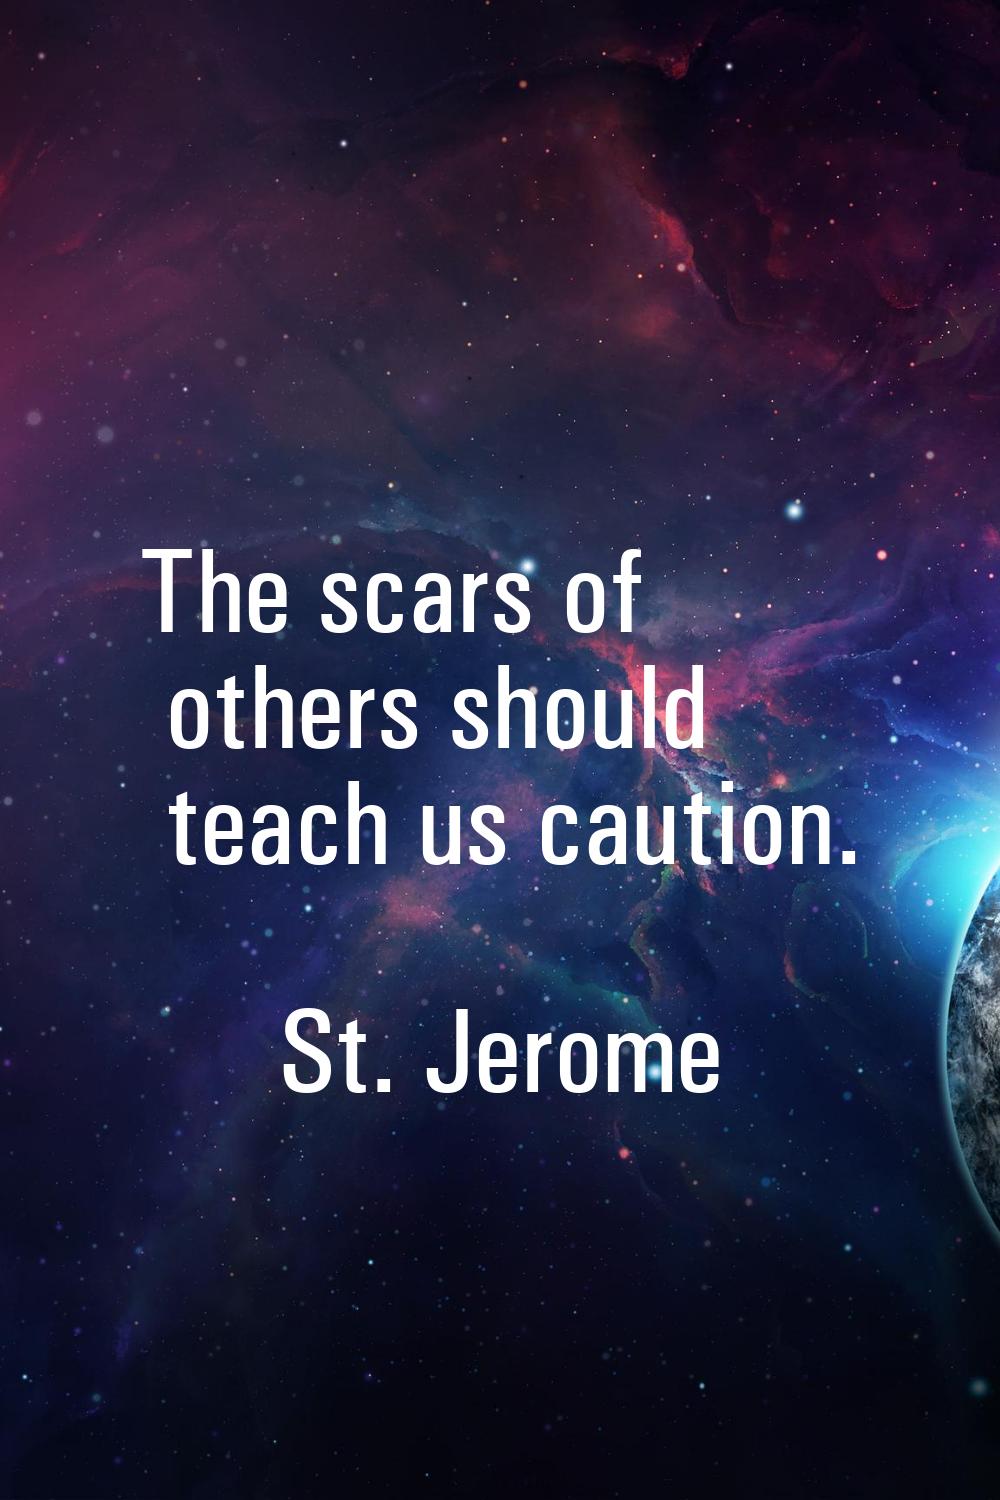 The scars of others should teach us caution.